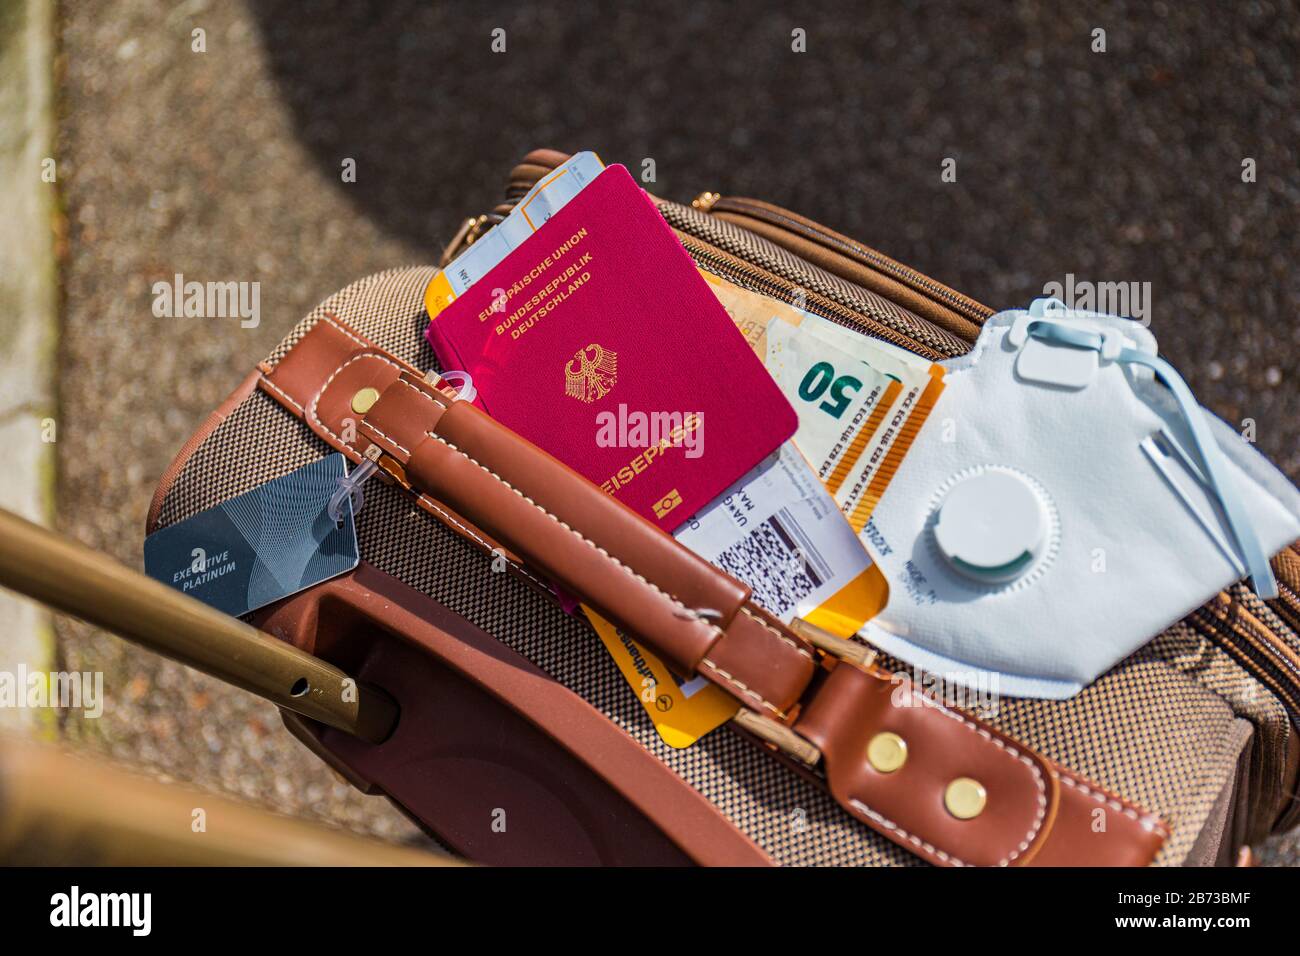 Munich, Germany - March 13th 2020: Air traveler business baggage with face mask for protection against the sars-cov-2 virus. Stock Photo